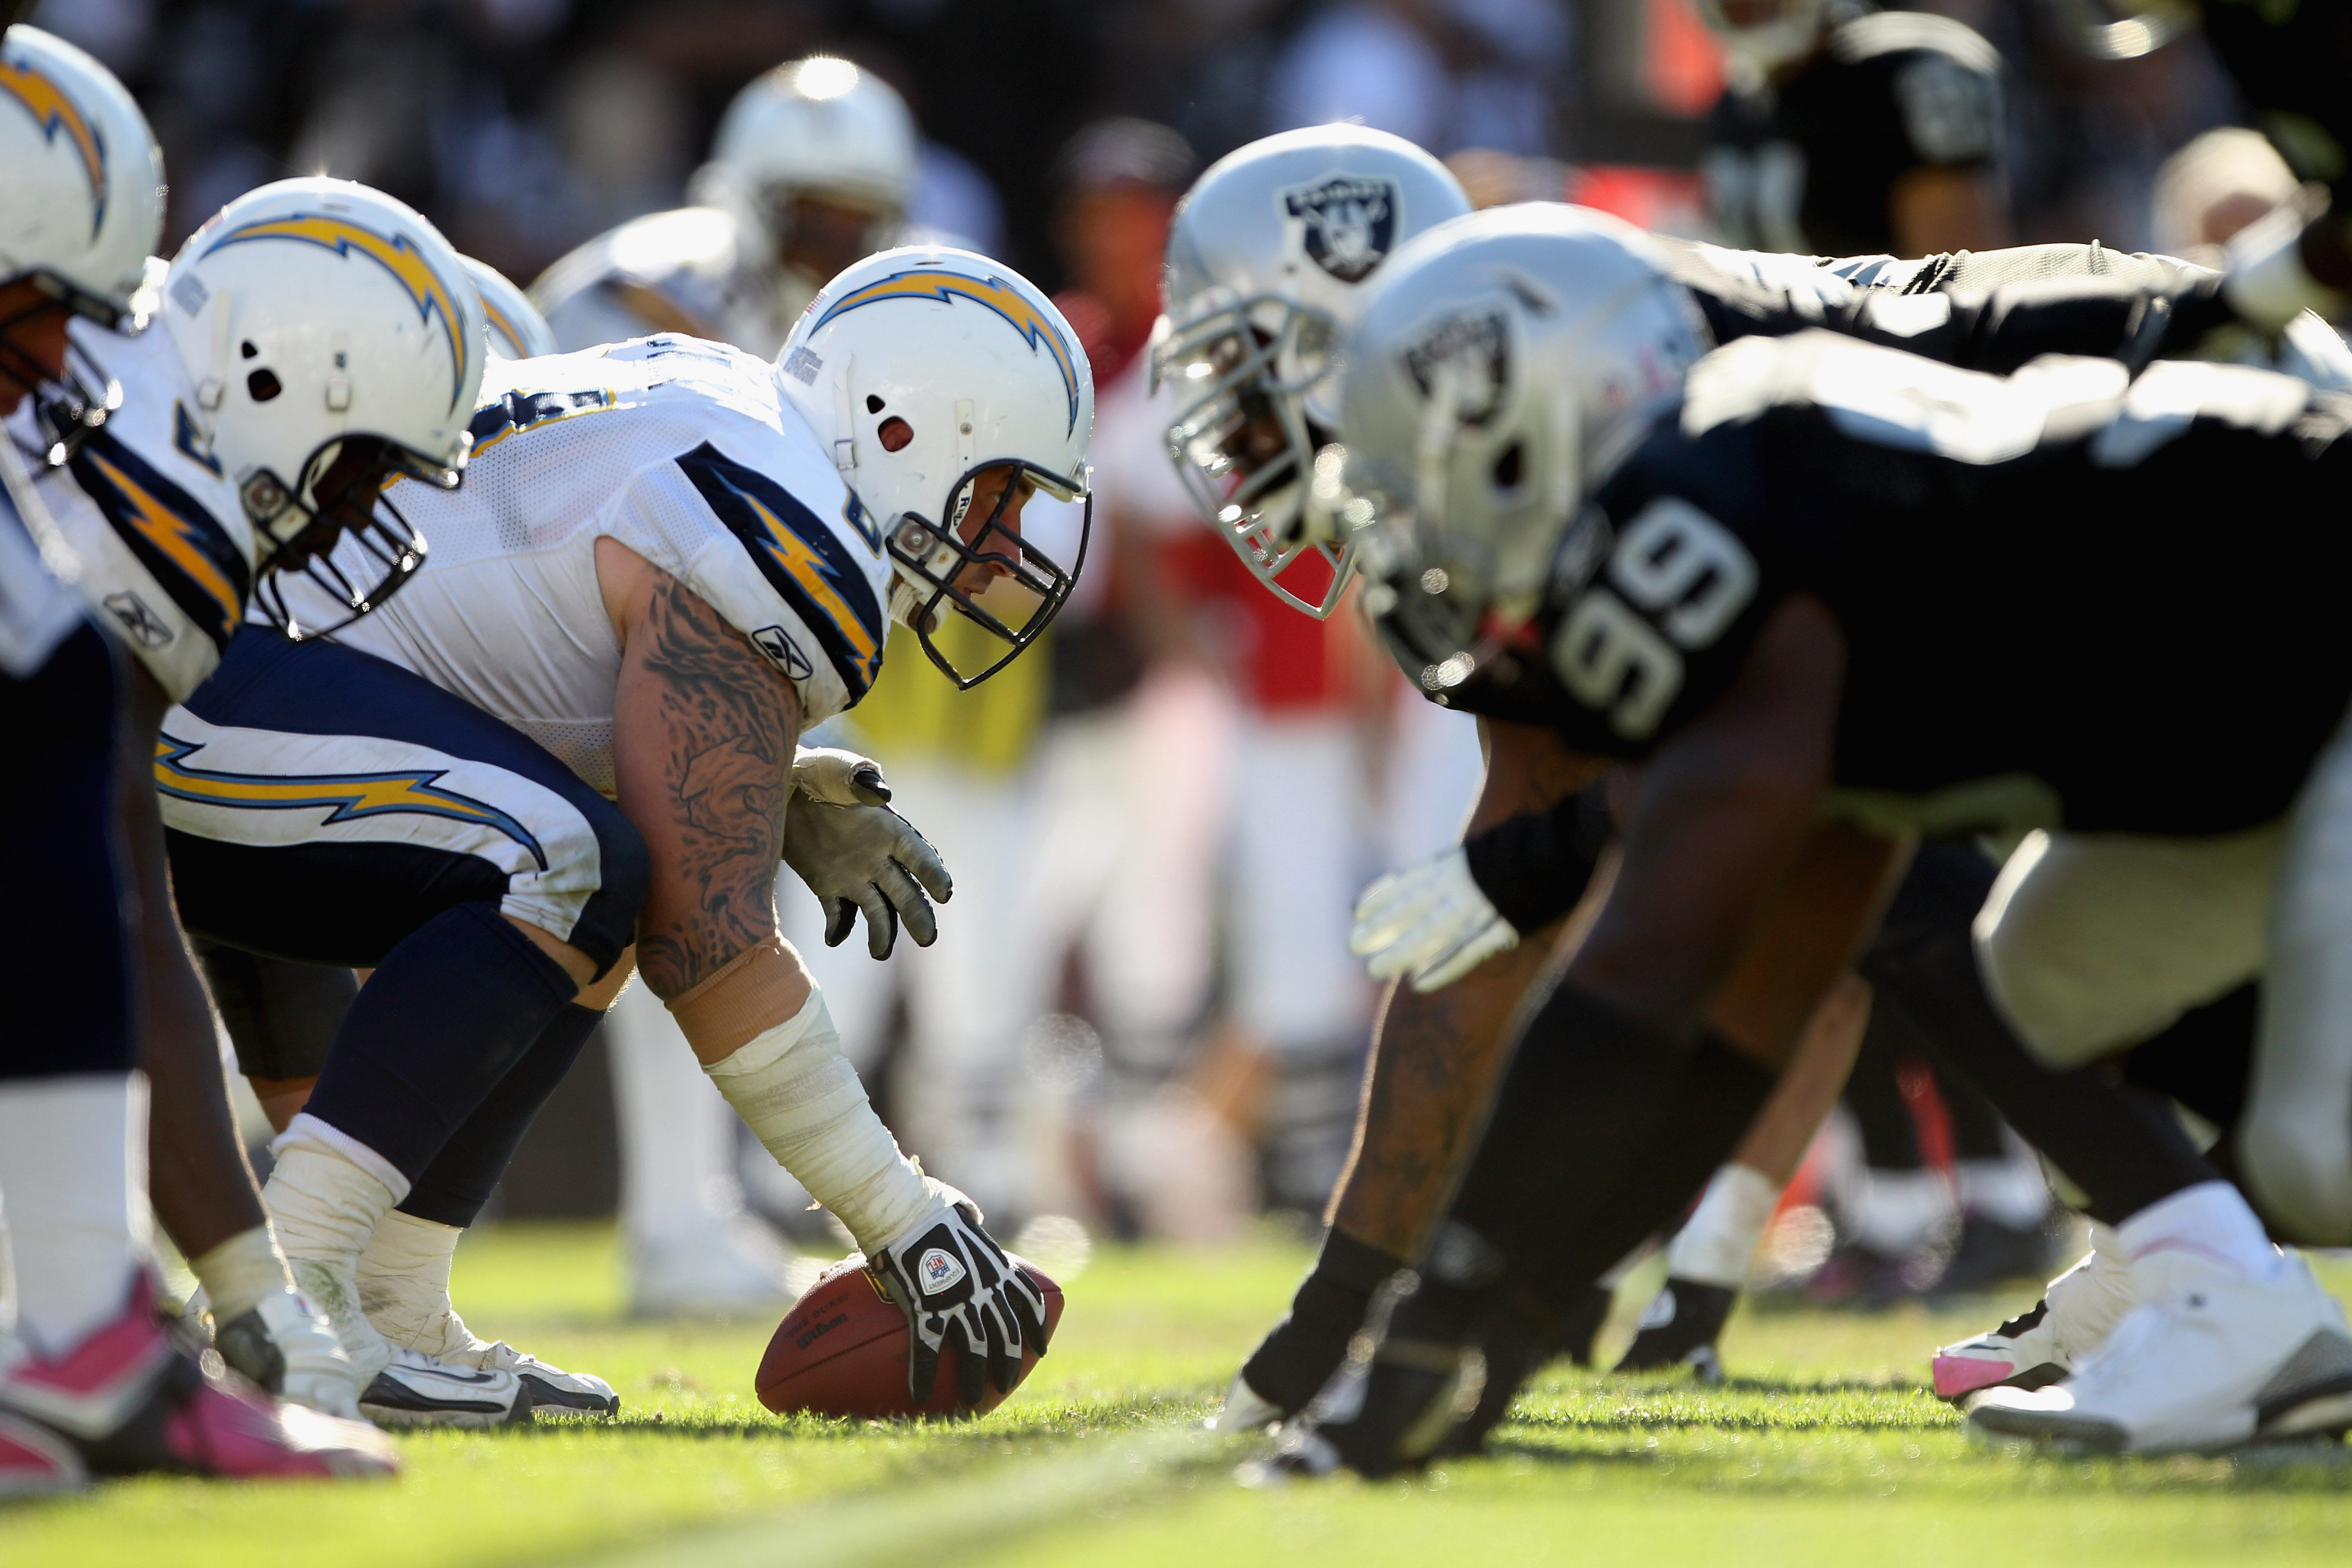 OAKLAND, CA - OCTOBER 10:  Nick Hardwick #61 at center and the rest of the San Diego Chargers line up against the Oakland Raiders at Oakland-Alameda County Coliseum on October 10, 2010 in Oakland, California.  (Photo by Ezra Shaw/Getty Images)